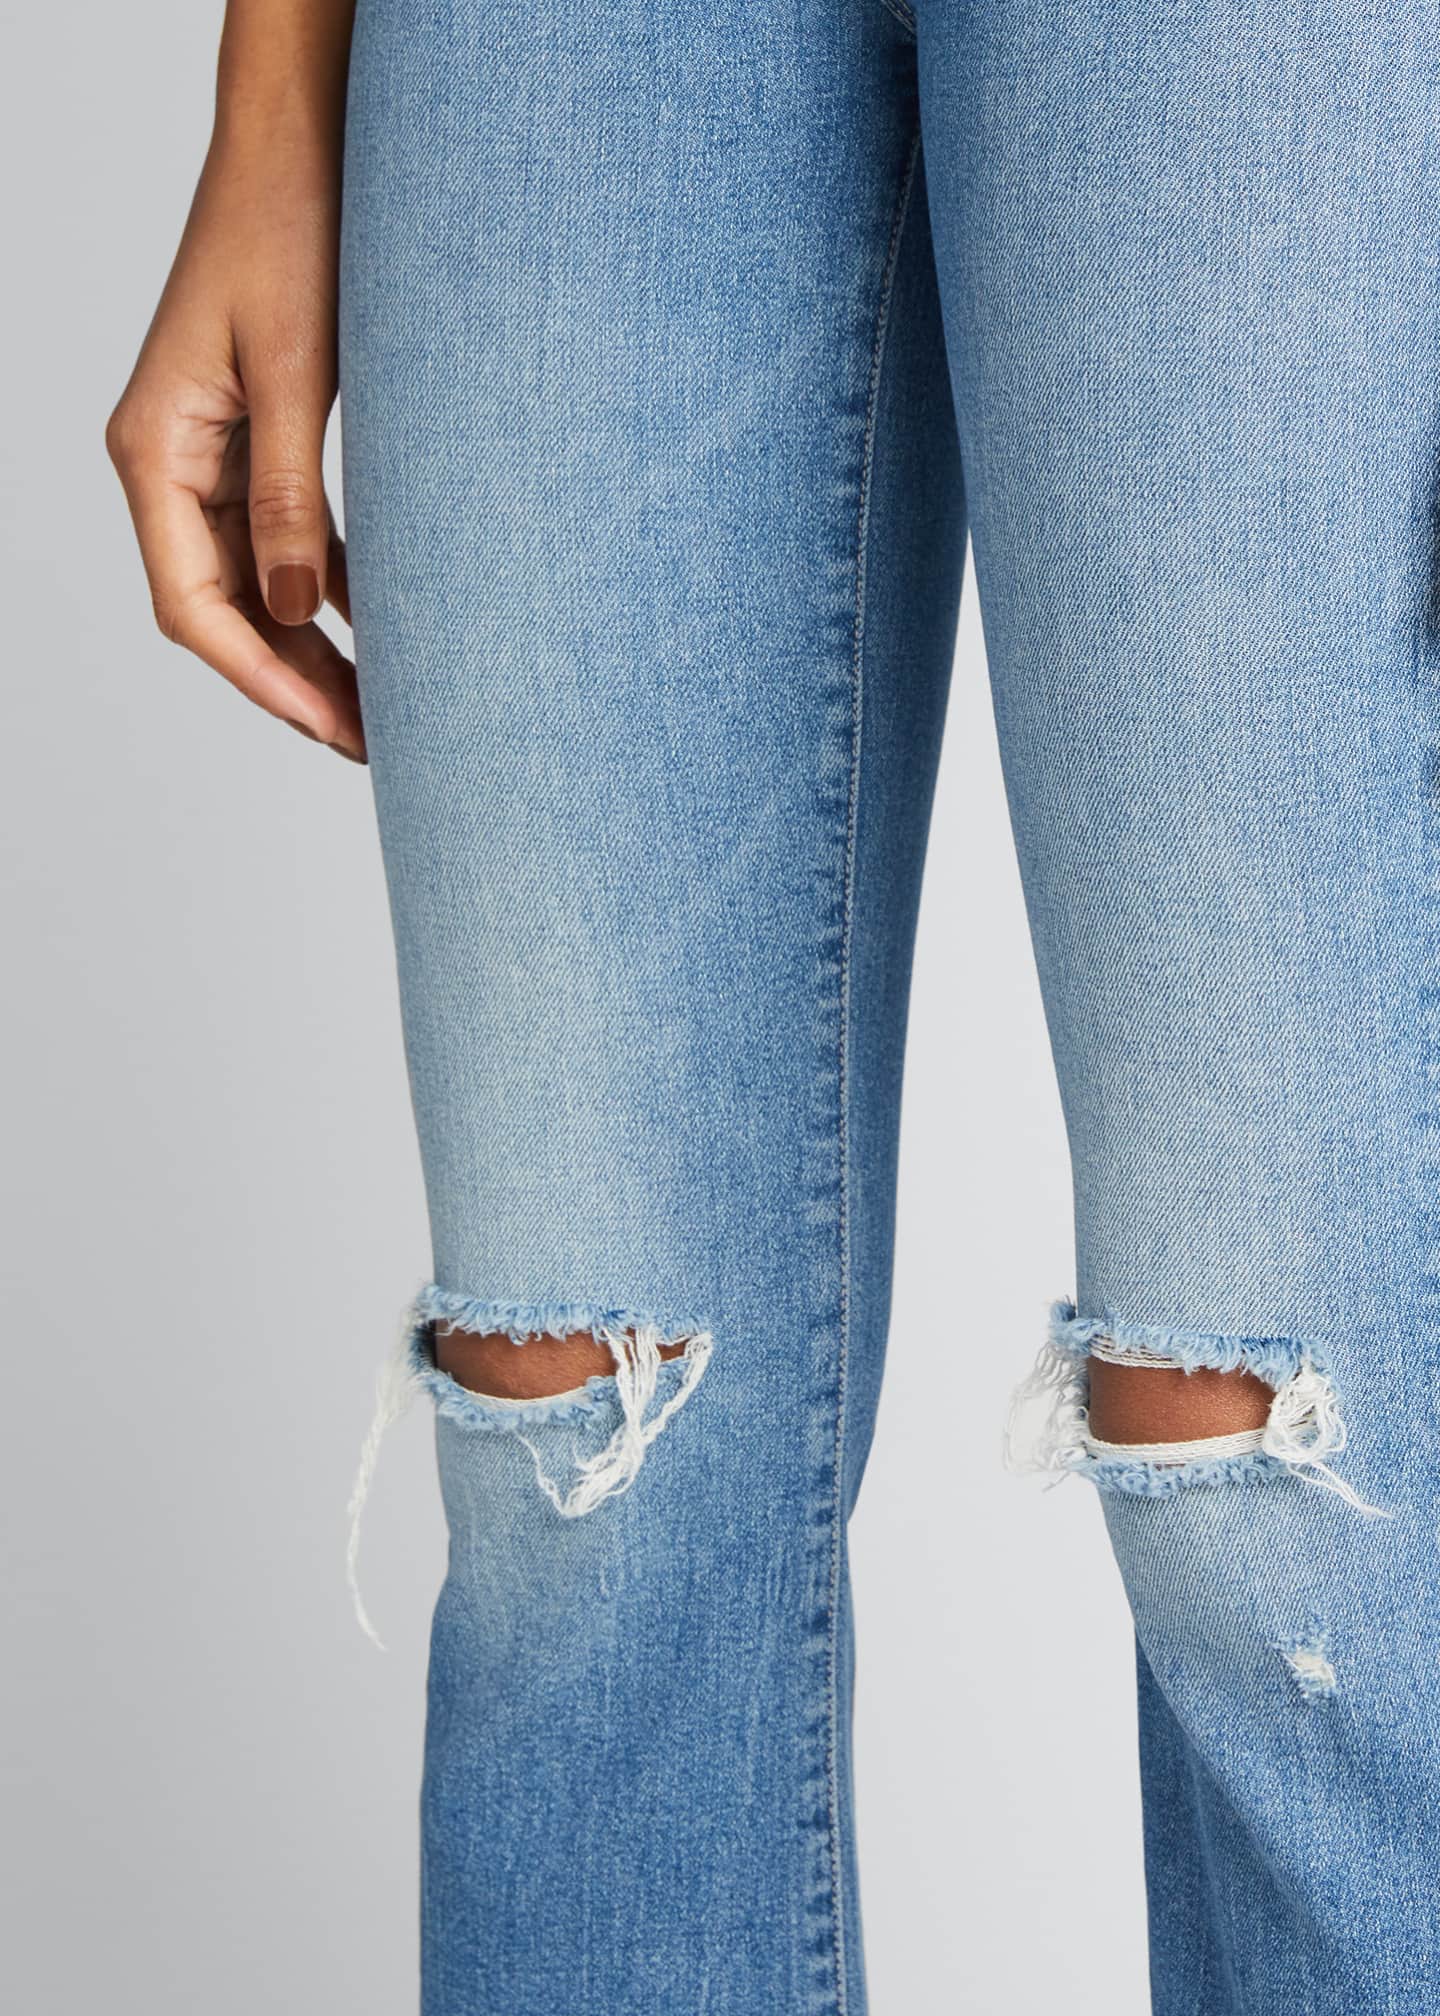 MOTHER The Hustler Ankle Fray Distressed Jeans - Bergdorf Goodman